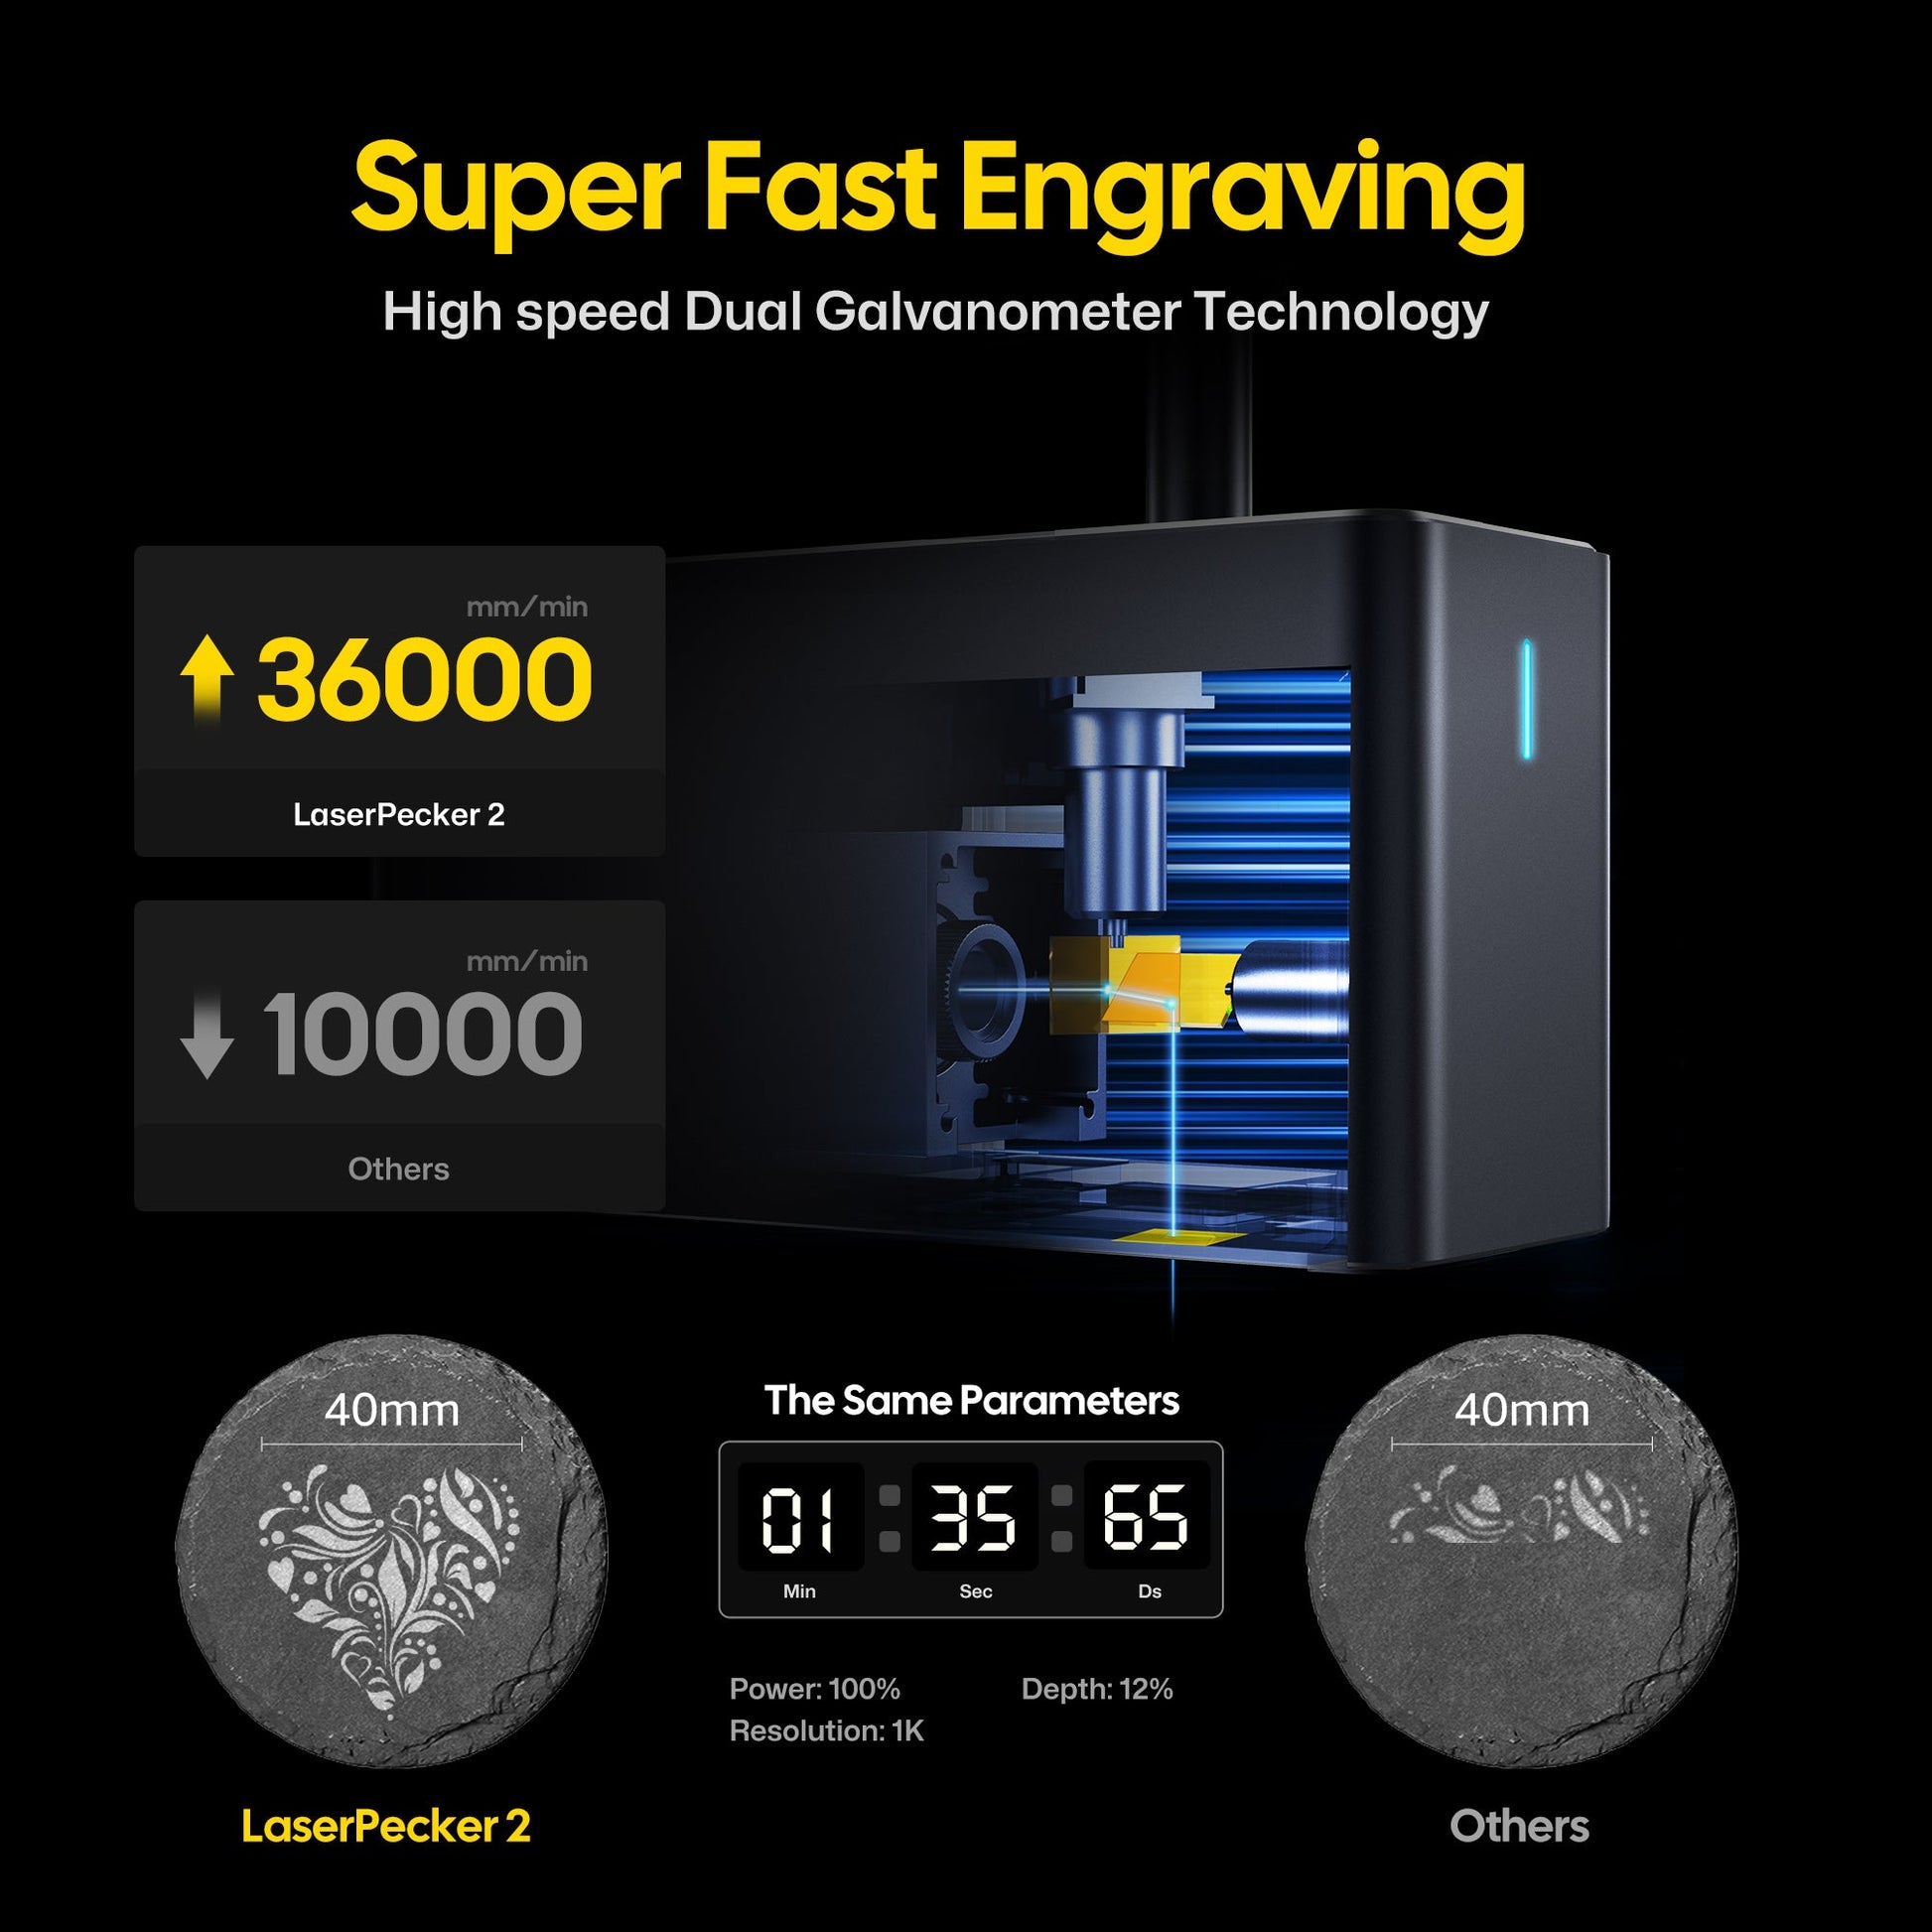 Super fast engraving speed 36000 mm/min